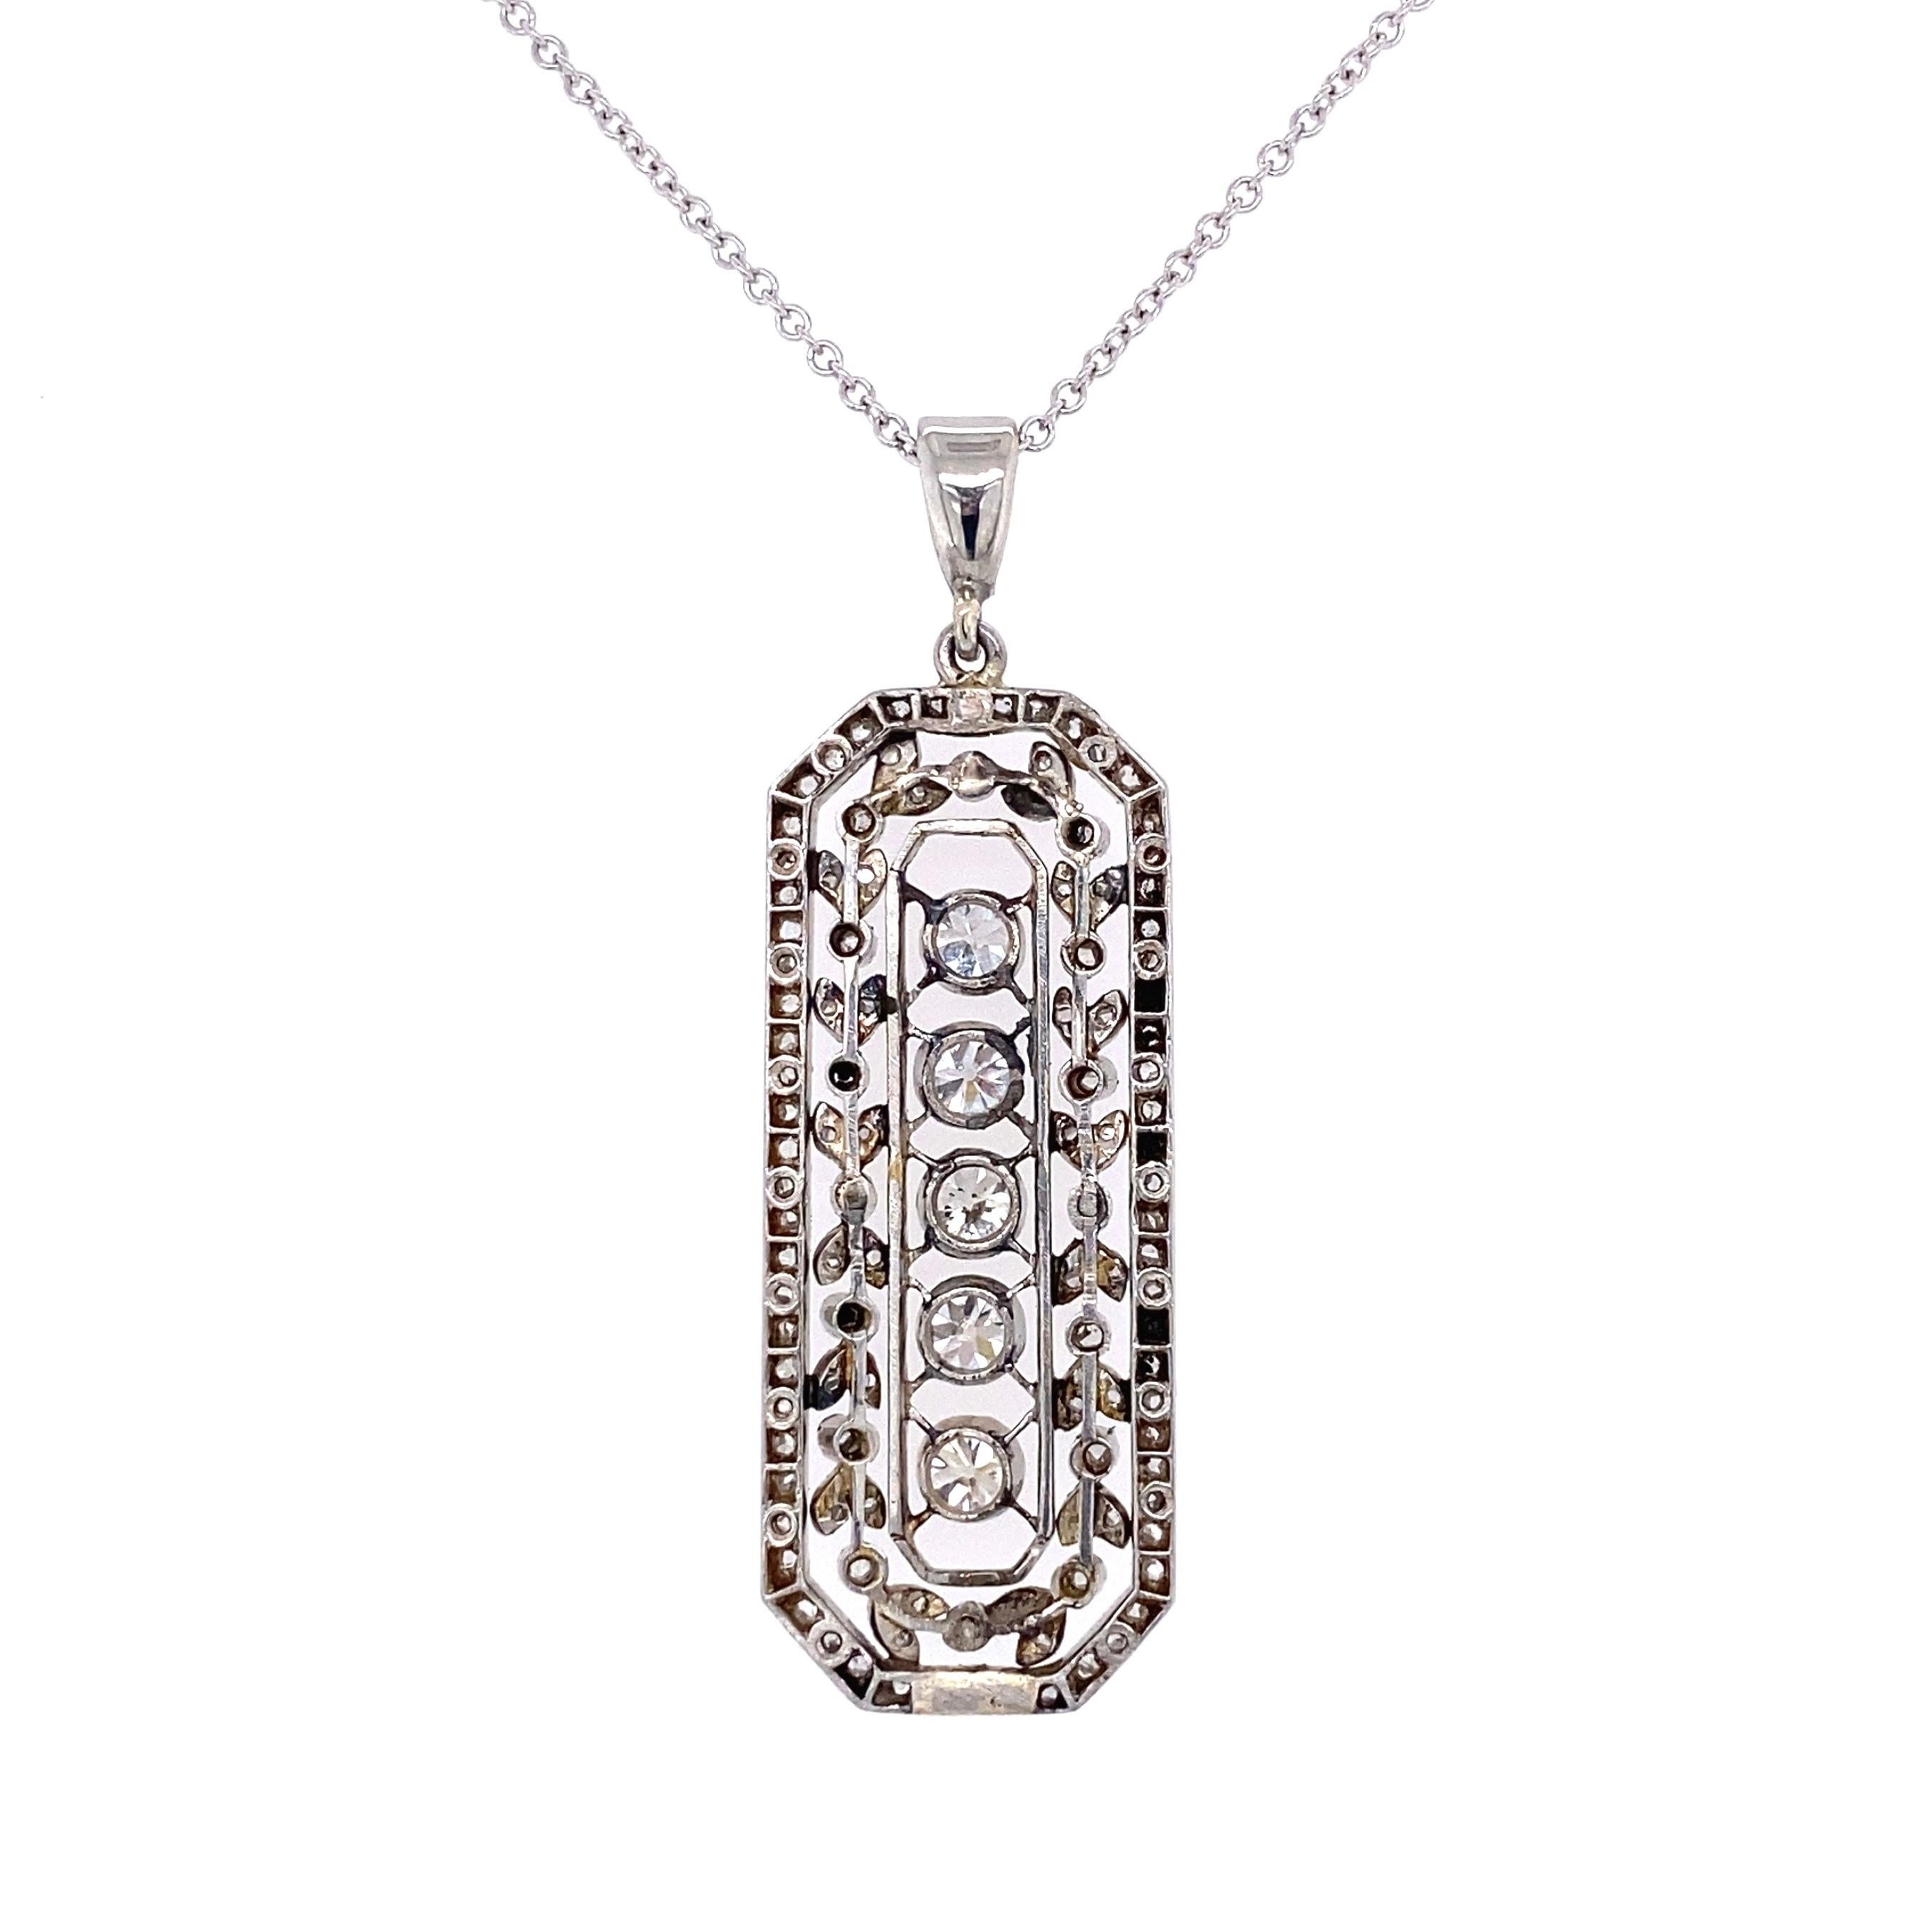 Edwardian Diamond Platinum Pendant Necklace Estate Fine Jewelry In Excellent Condition For Sale In Montreal, QC